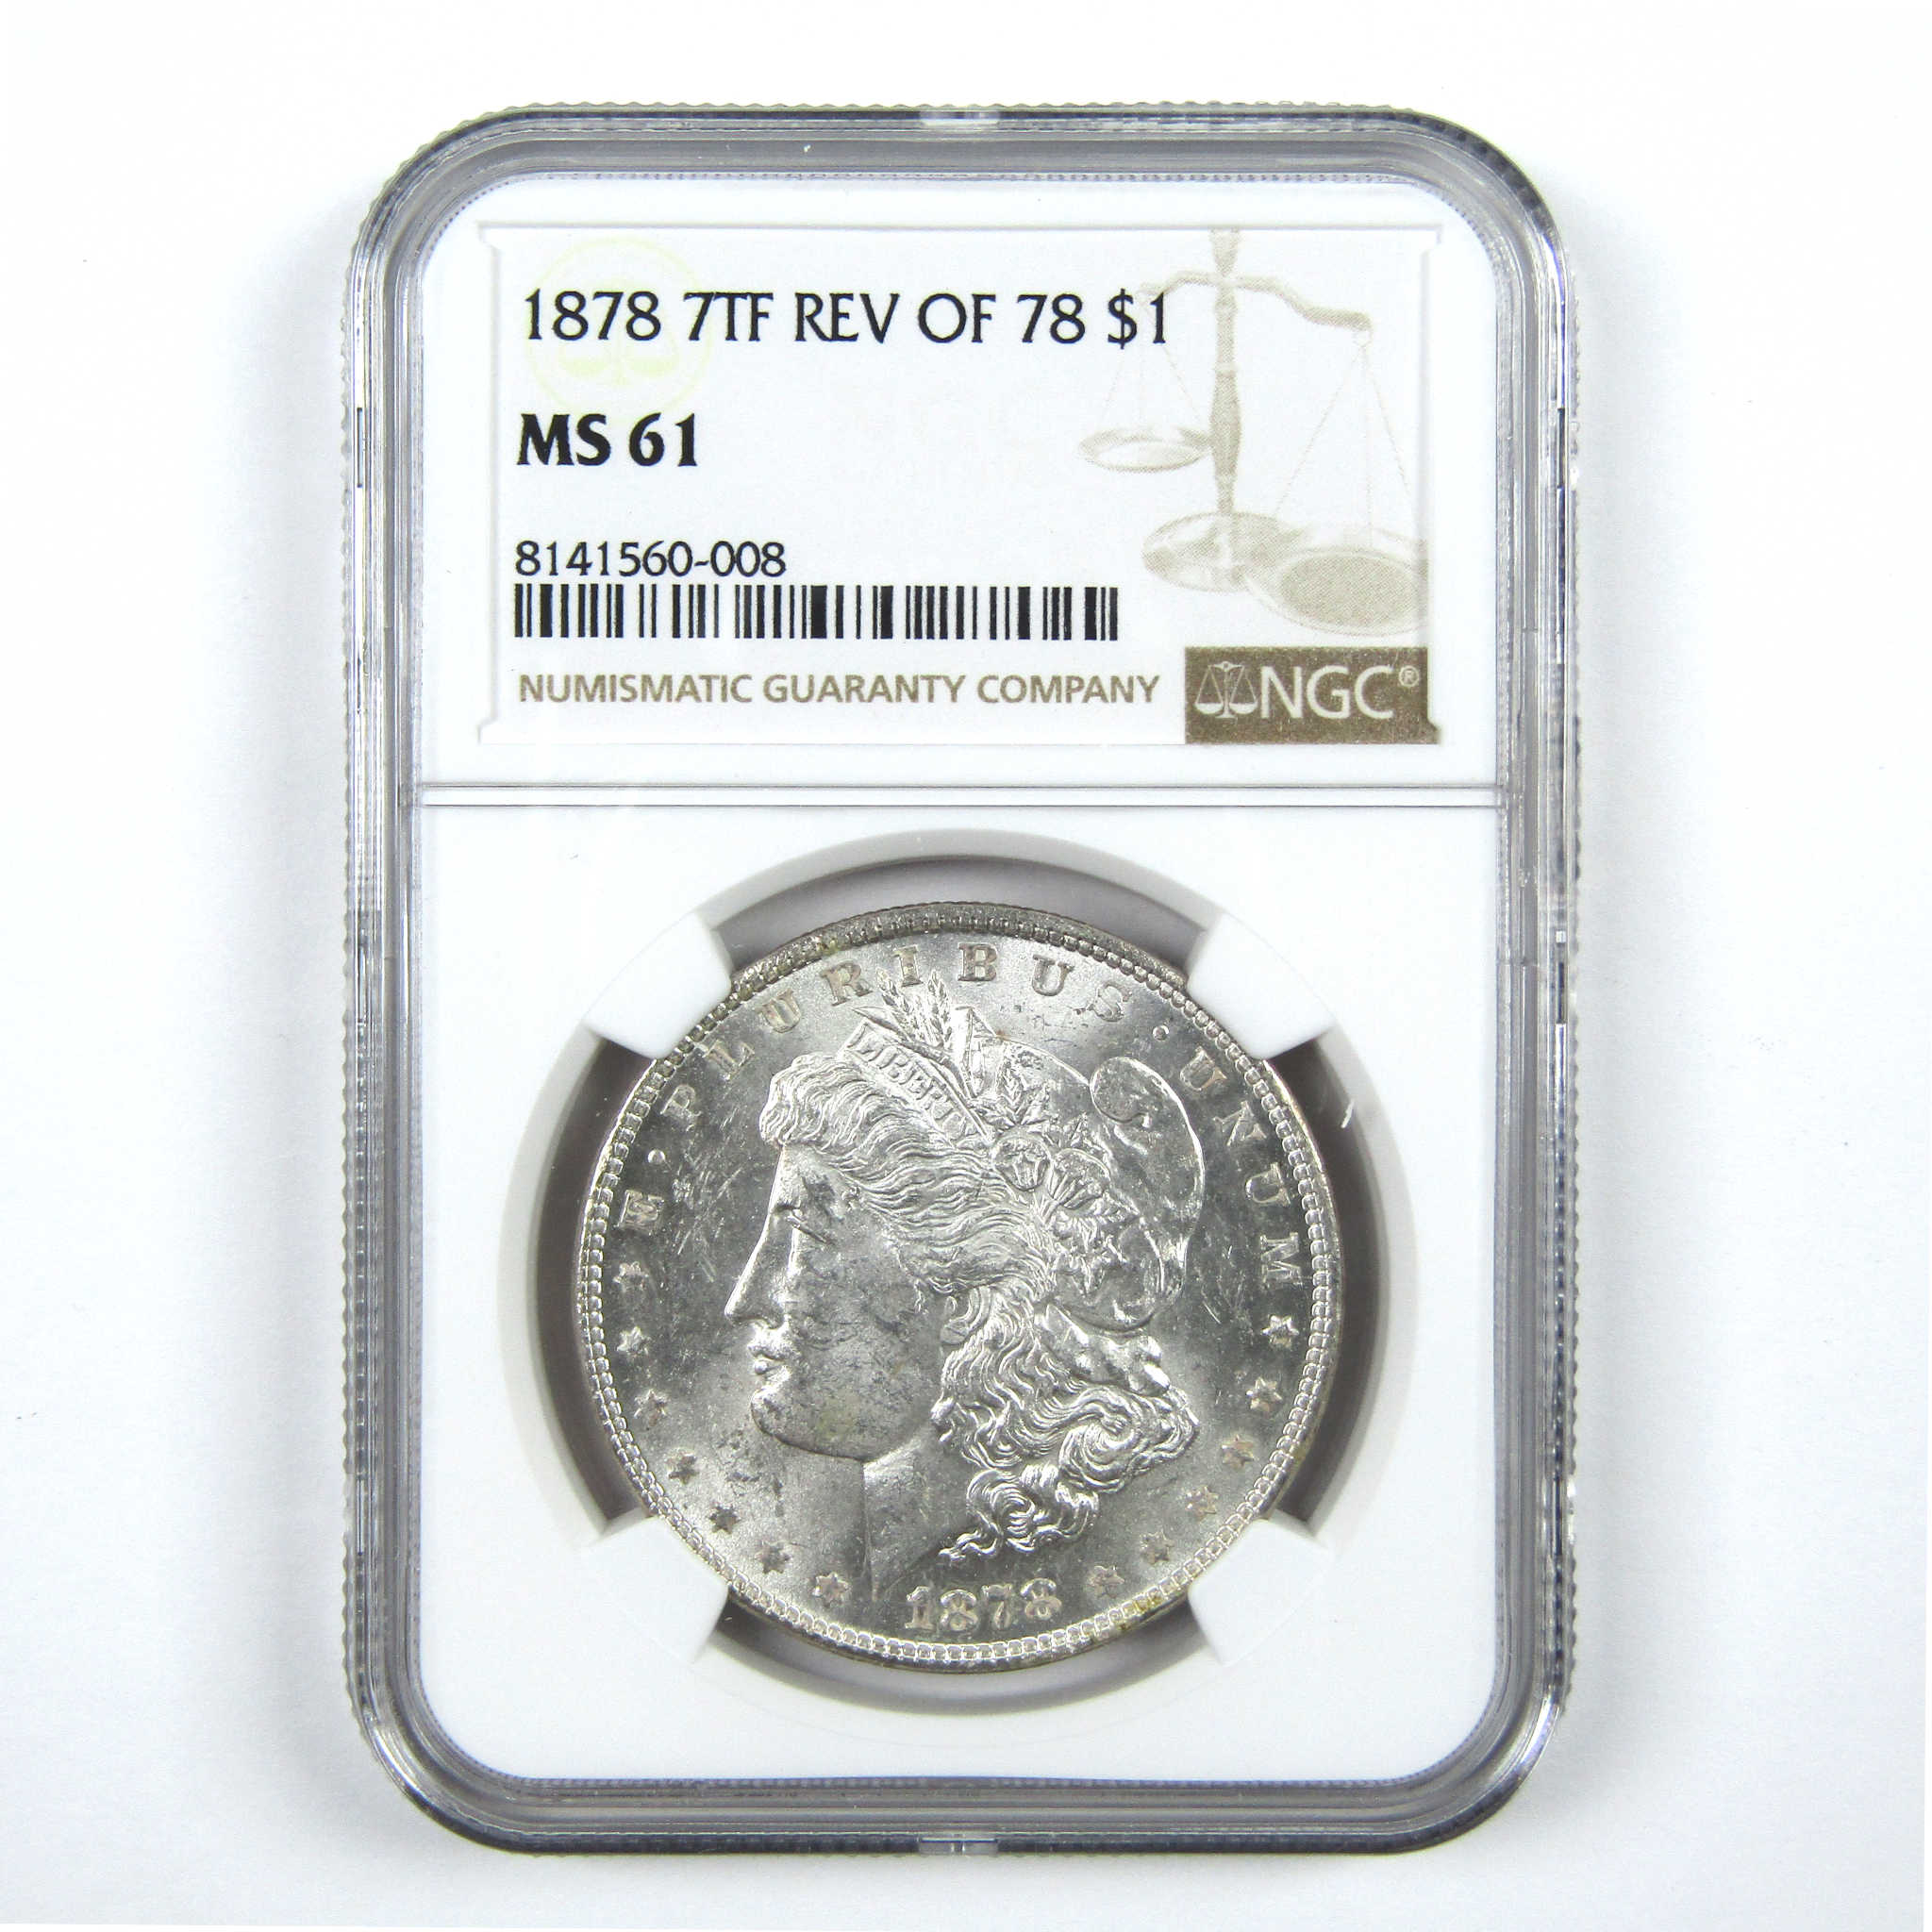 1878 7TF Rev 78 Morgan Dollar MS 61 NGC Uncirculated SKU:I14033 - Morgan coin - Morgan silver dollar - Morgan silver dollar for sale - Profile Coins &amp; Collectibles